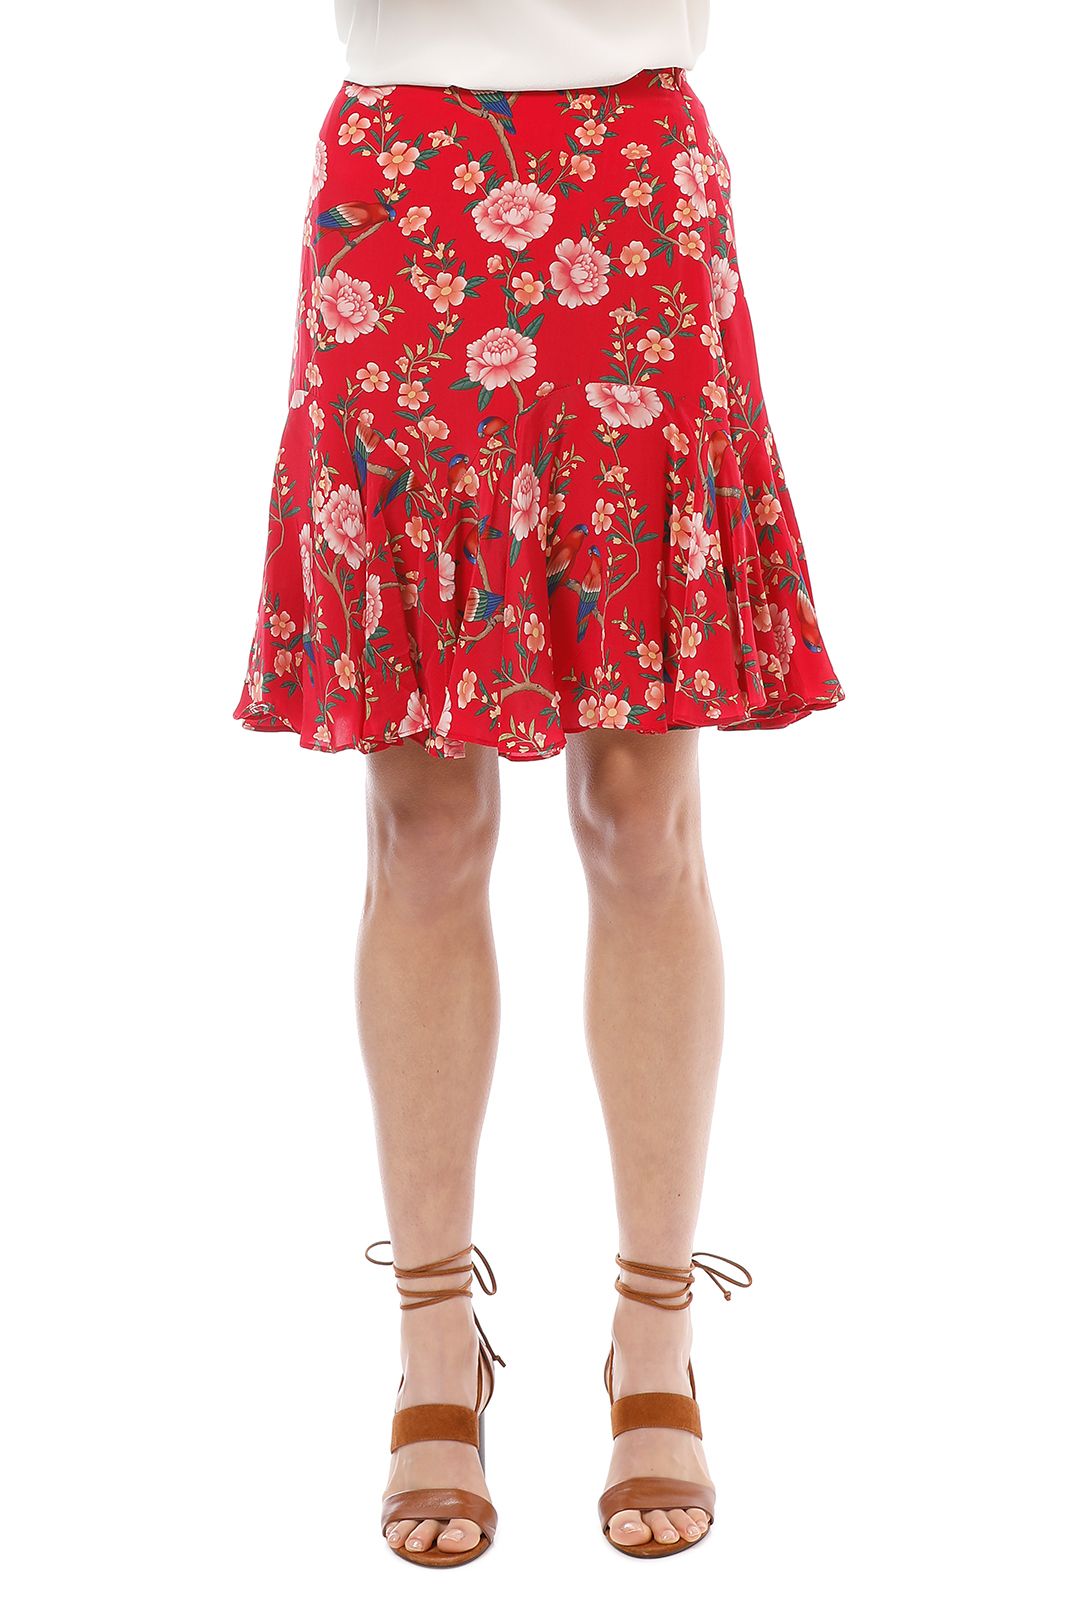 Alannah Hill - Own Wings Skirt - Red - Front Detail